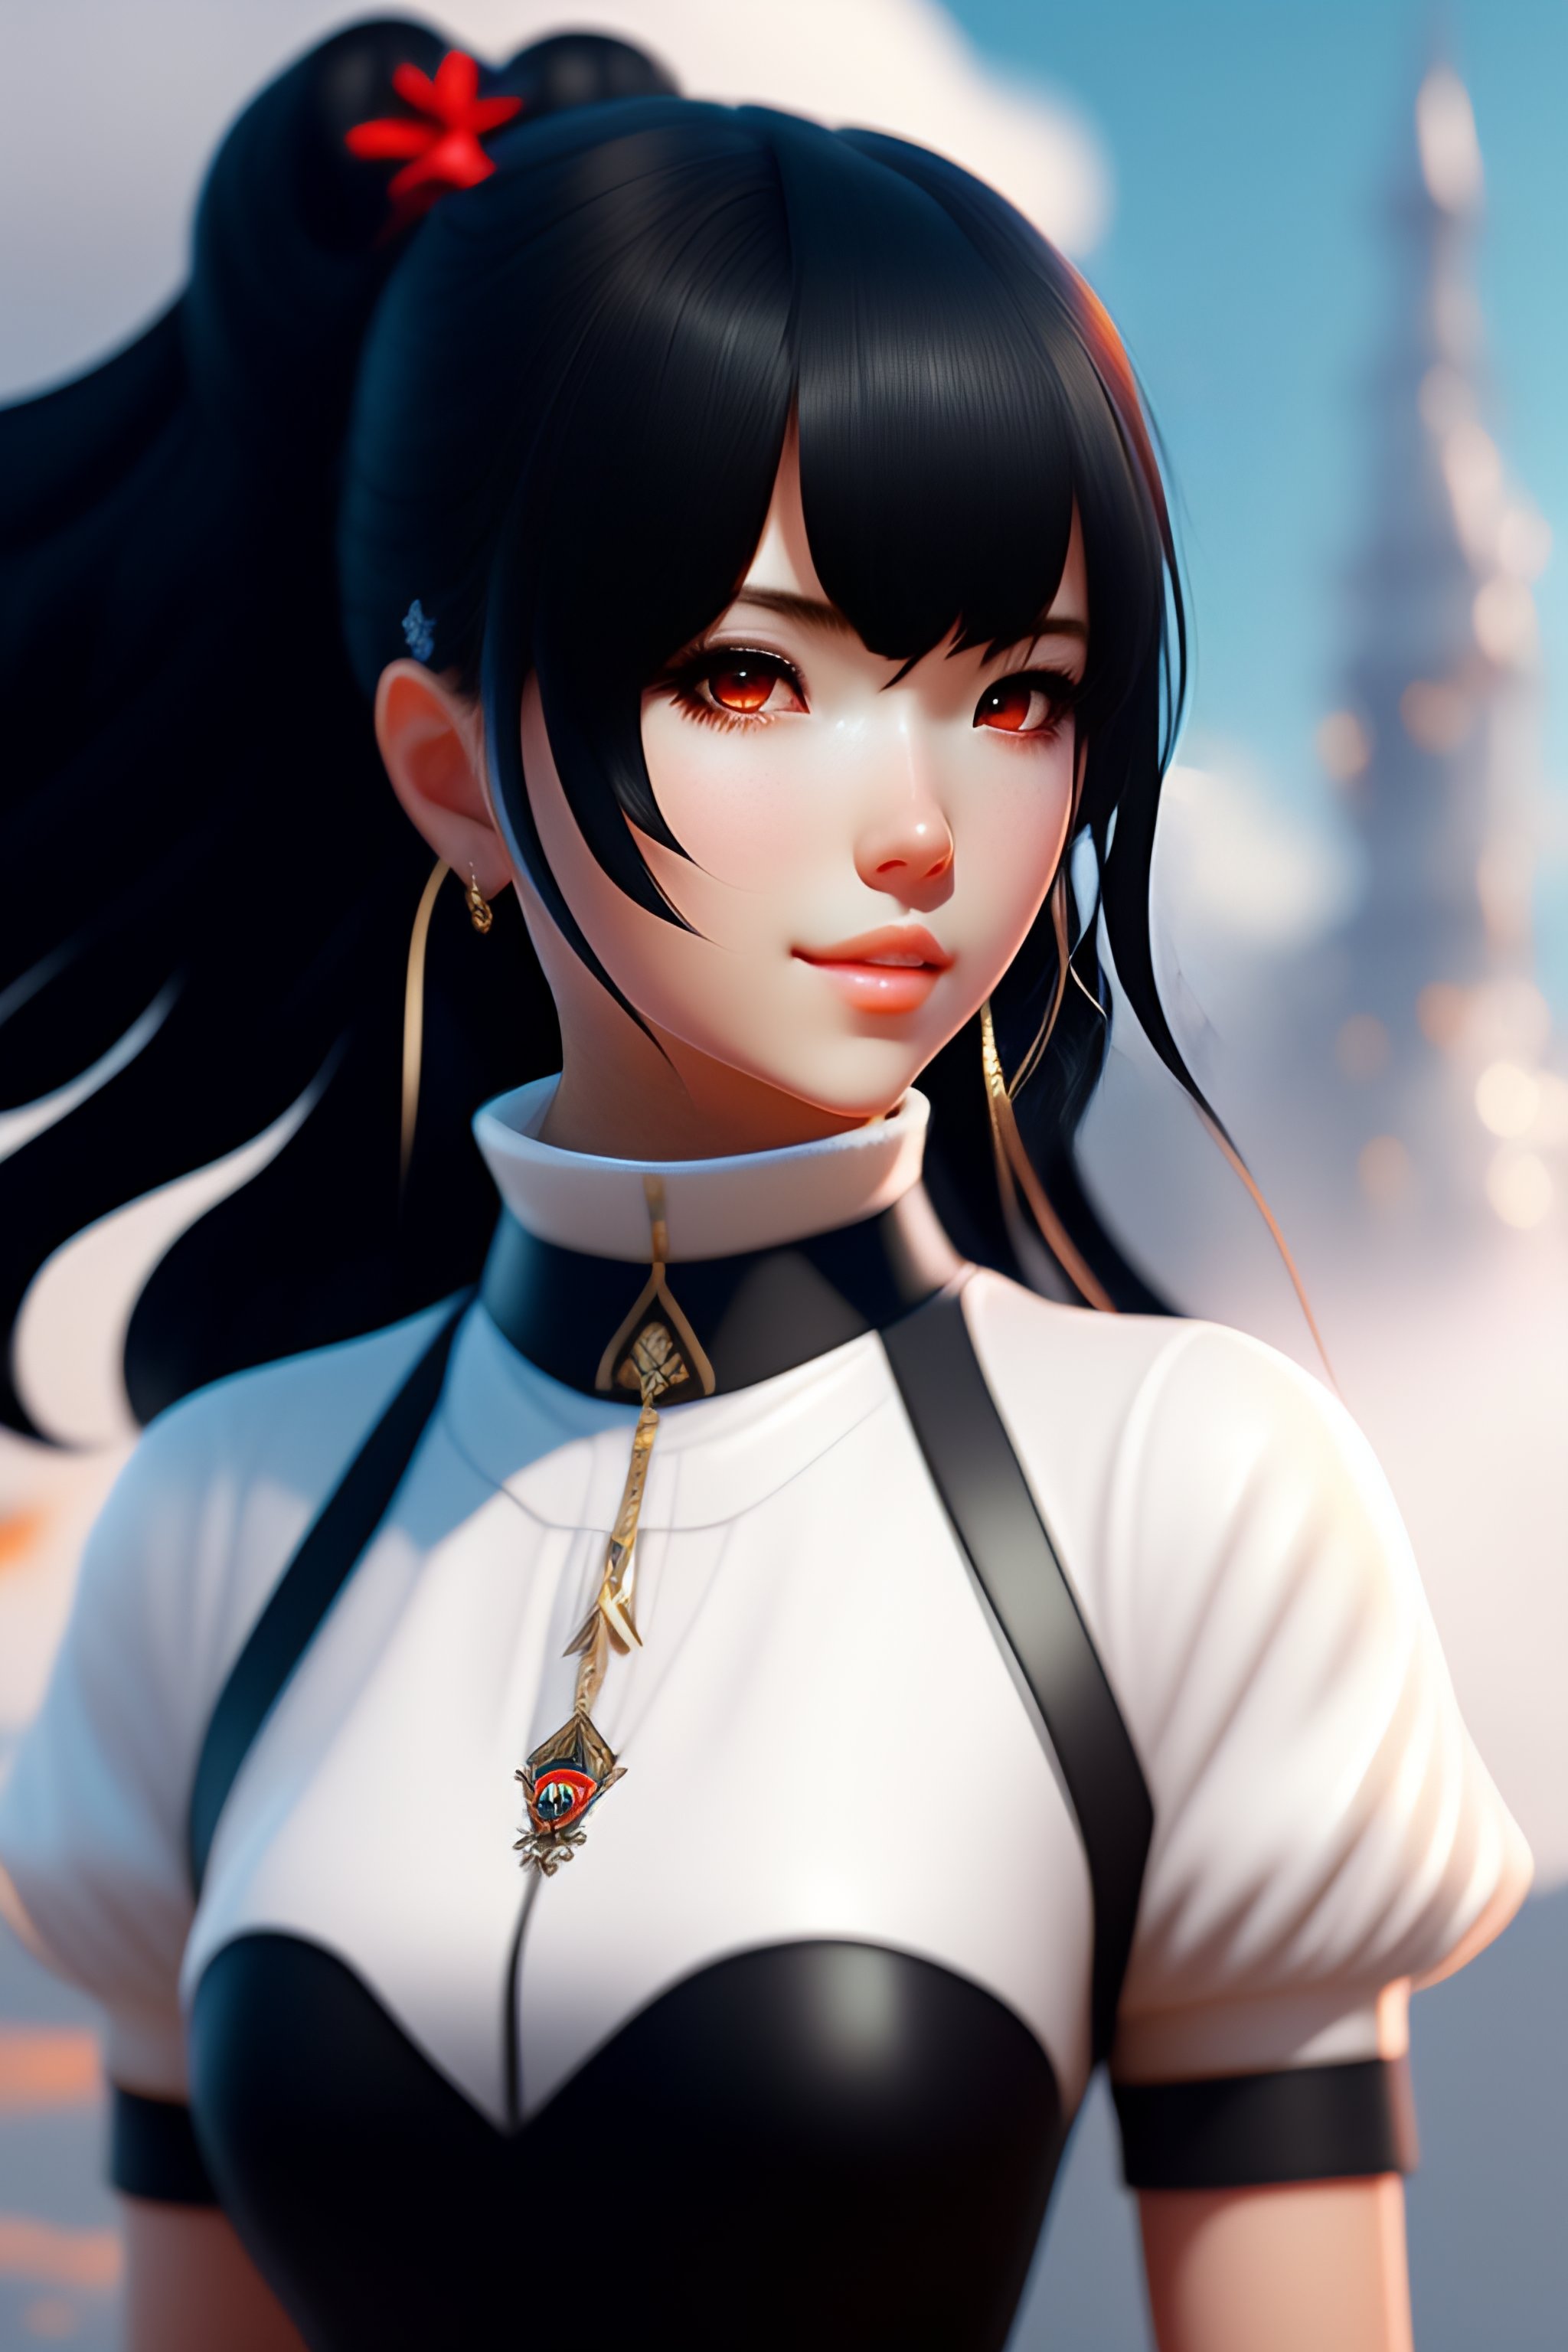 Lexica Cute Anime Girl With Red Eyes Black Hair Wearing White Black Outfit Costume Black Hair 5427